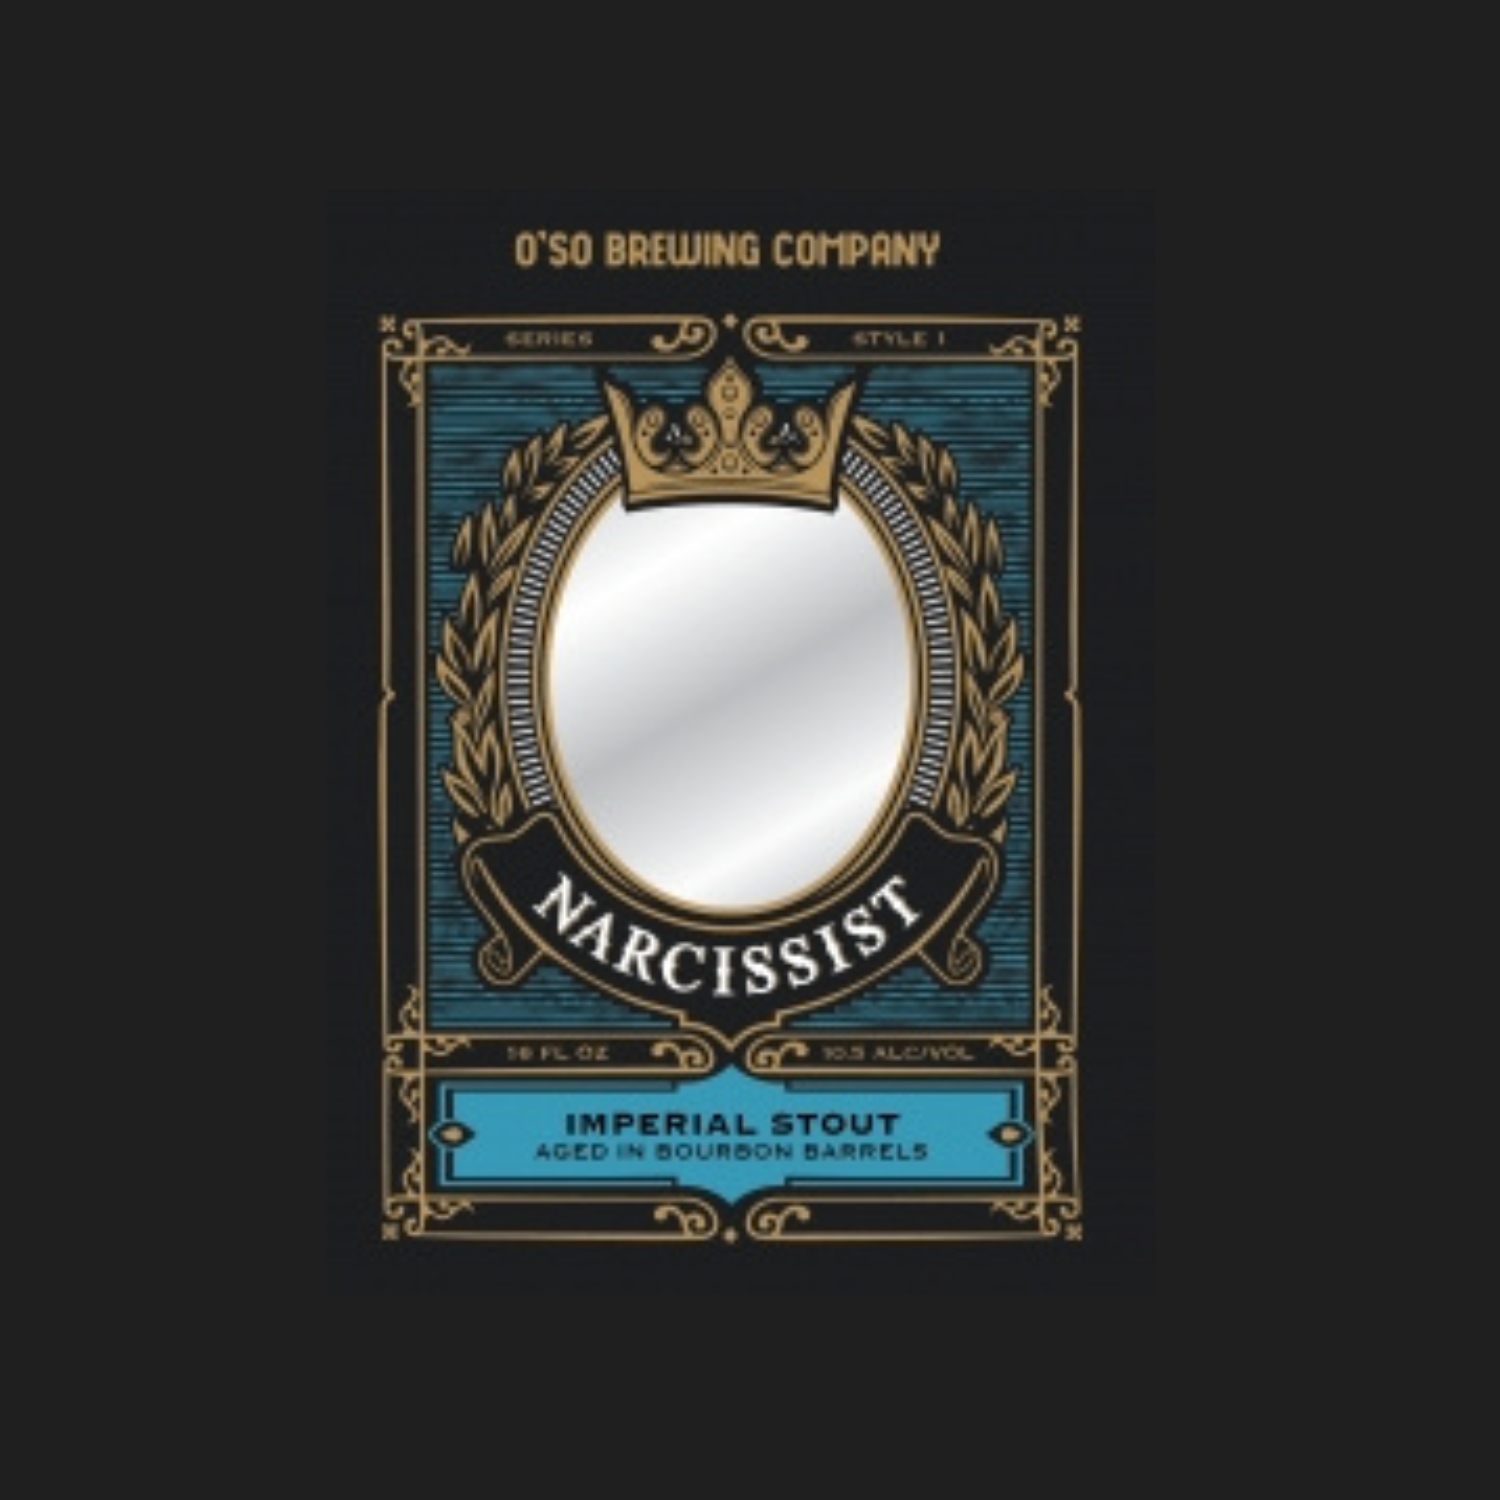 O'So Brewing - Narcissist Barrel Aged Imperial Stout